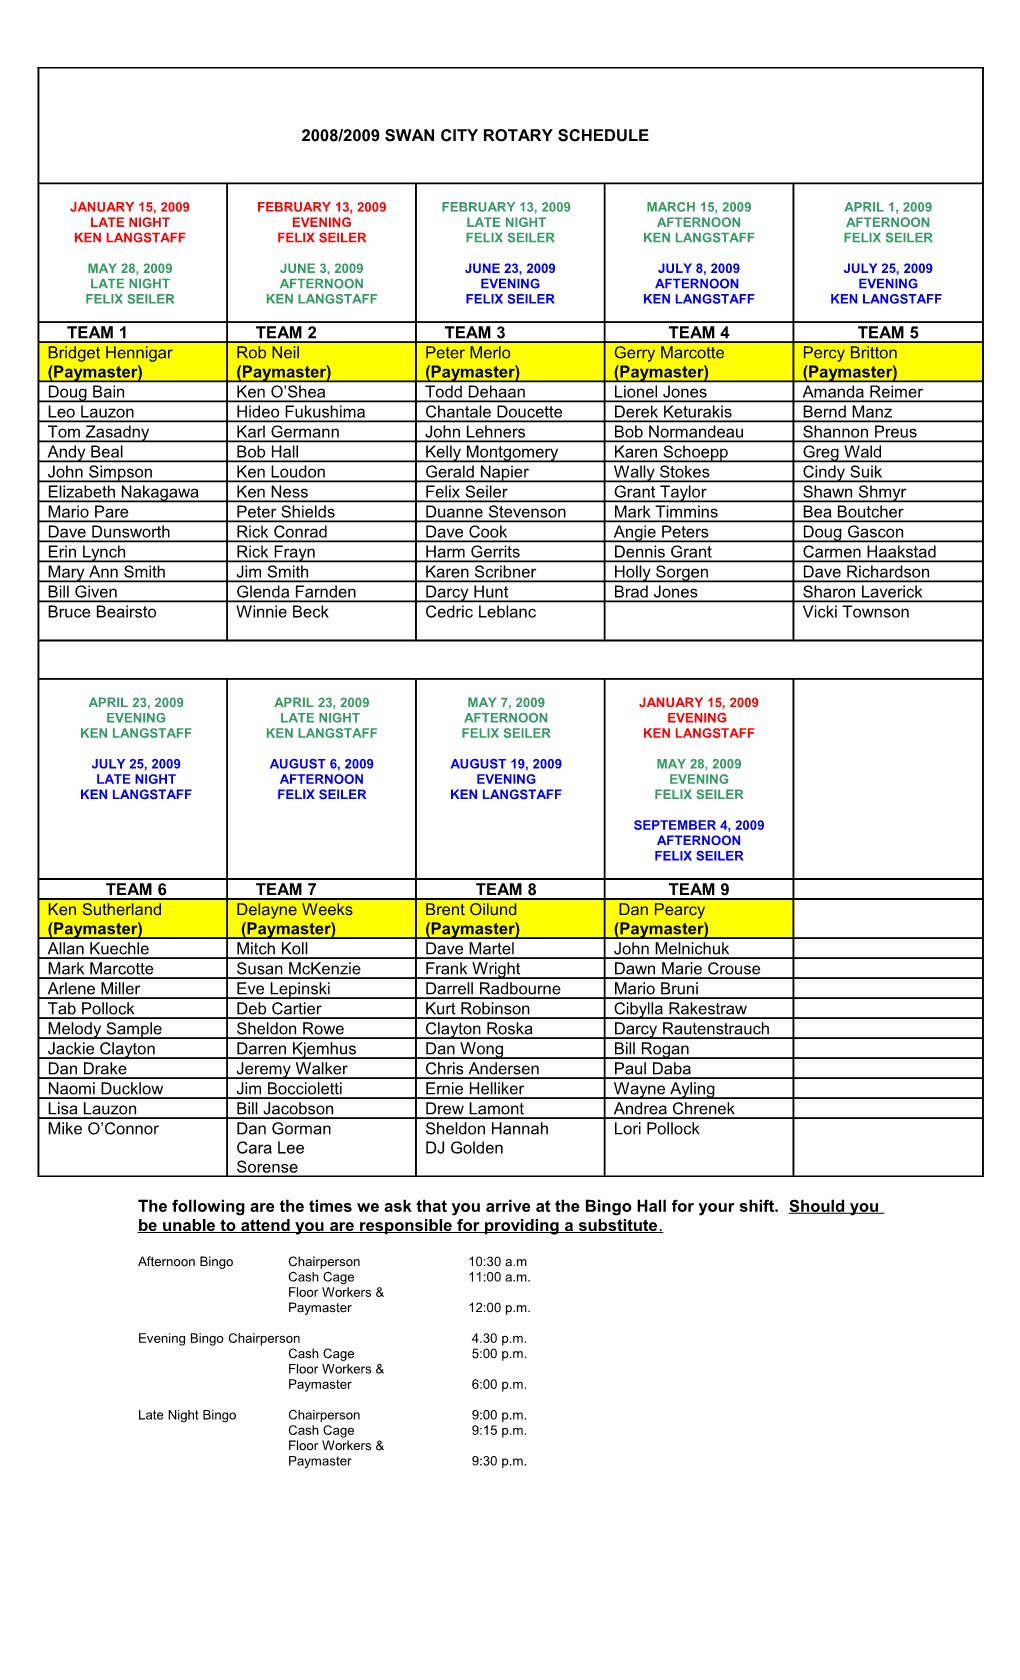 2006 Swan City Rotary Schedule